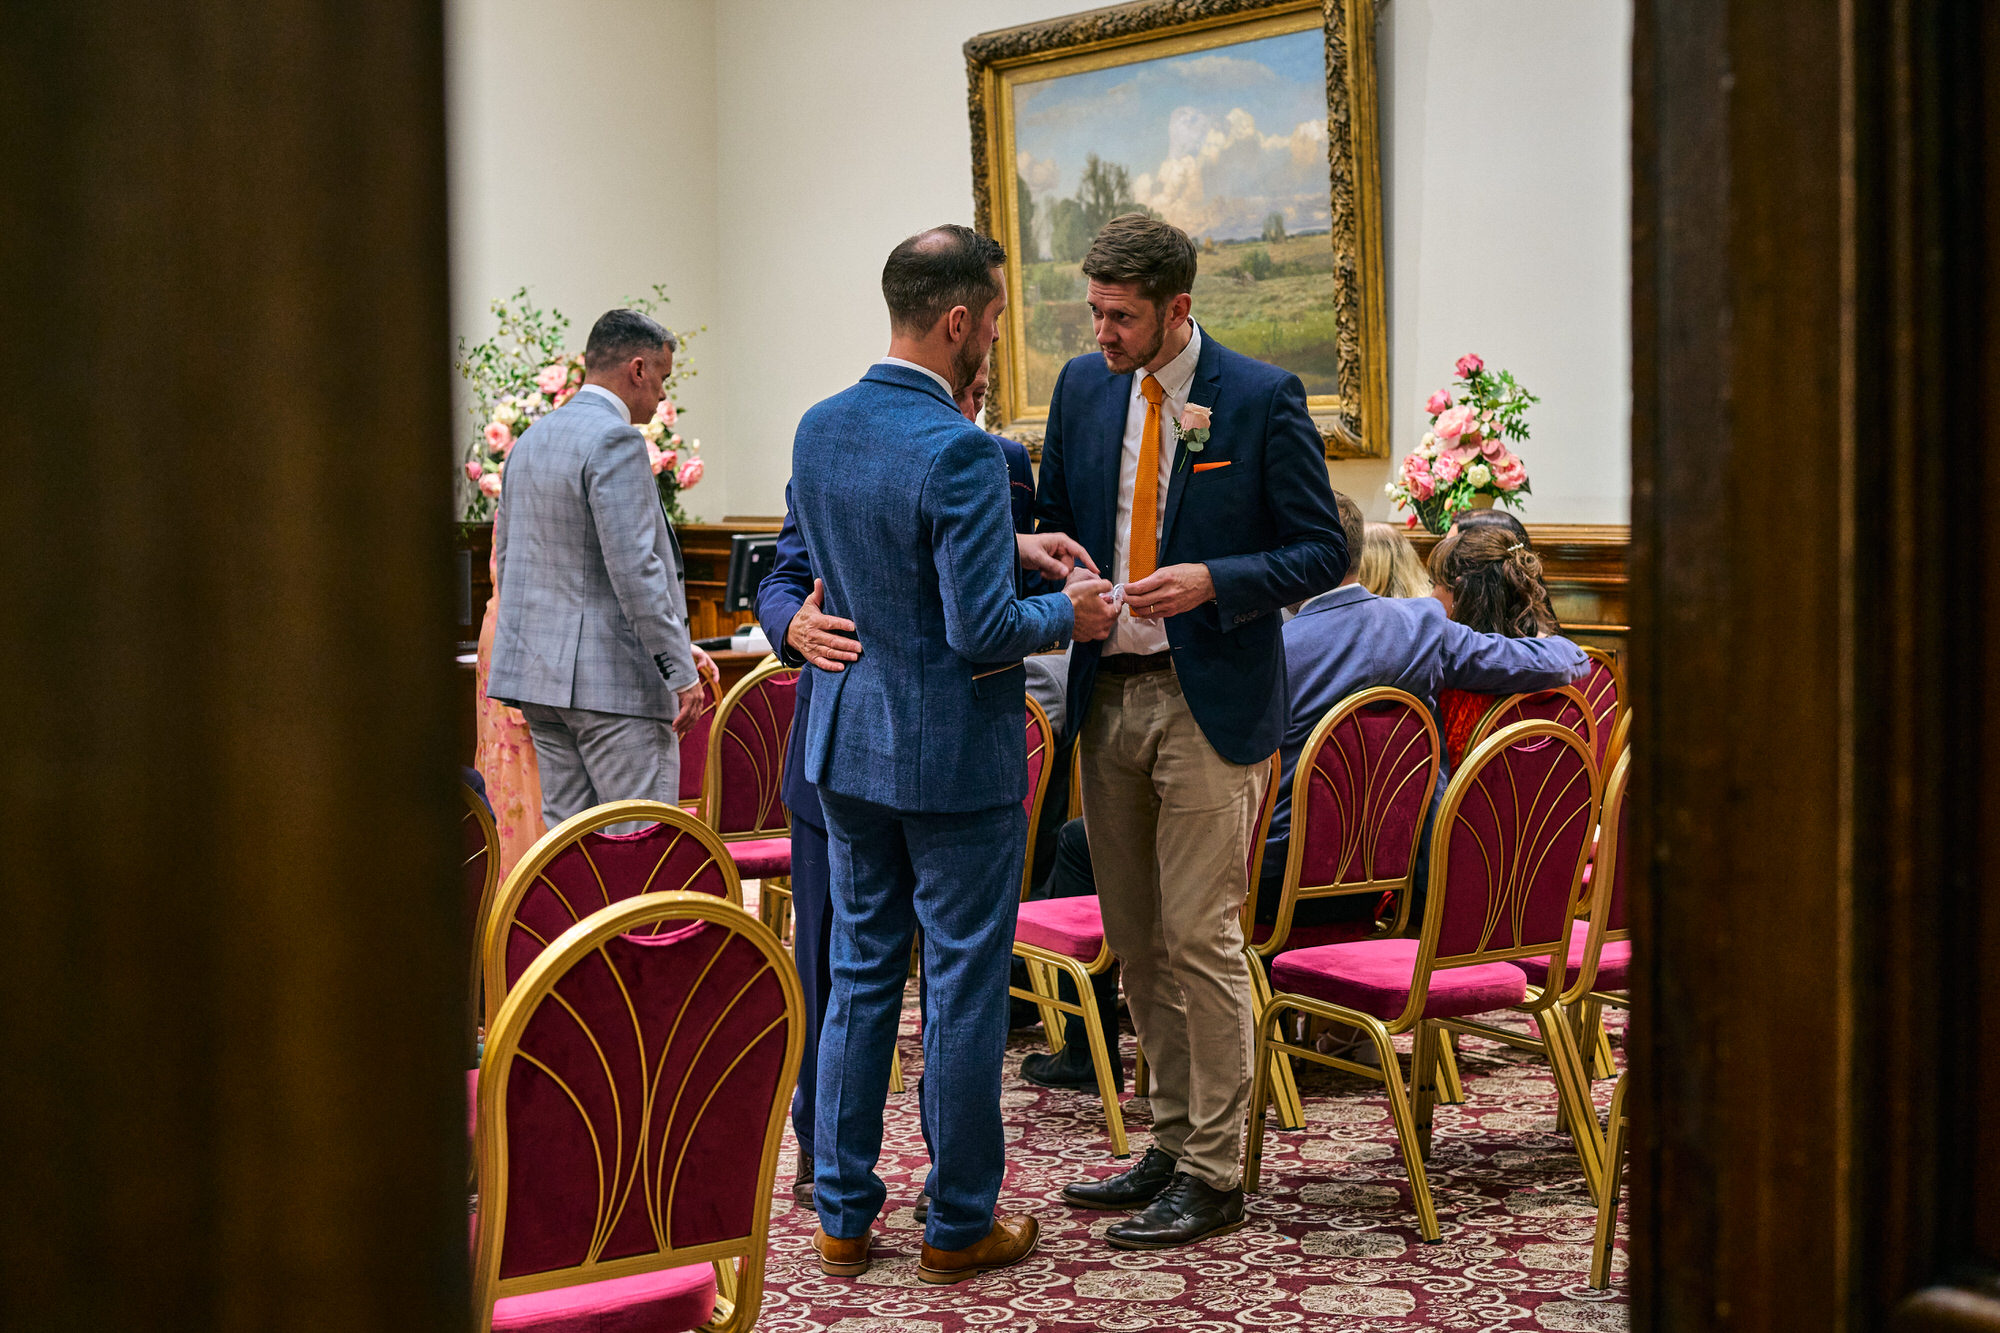 The Groom and Best Man chat before the ceremony at St Georges Hall in Liverpool